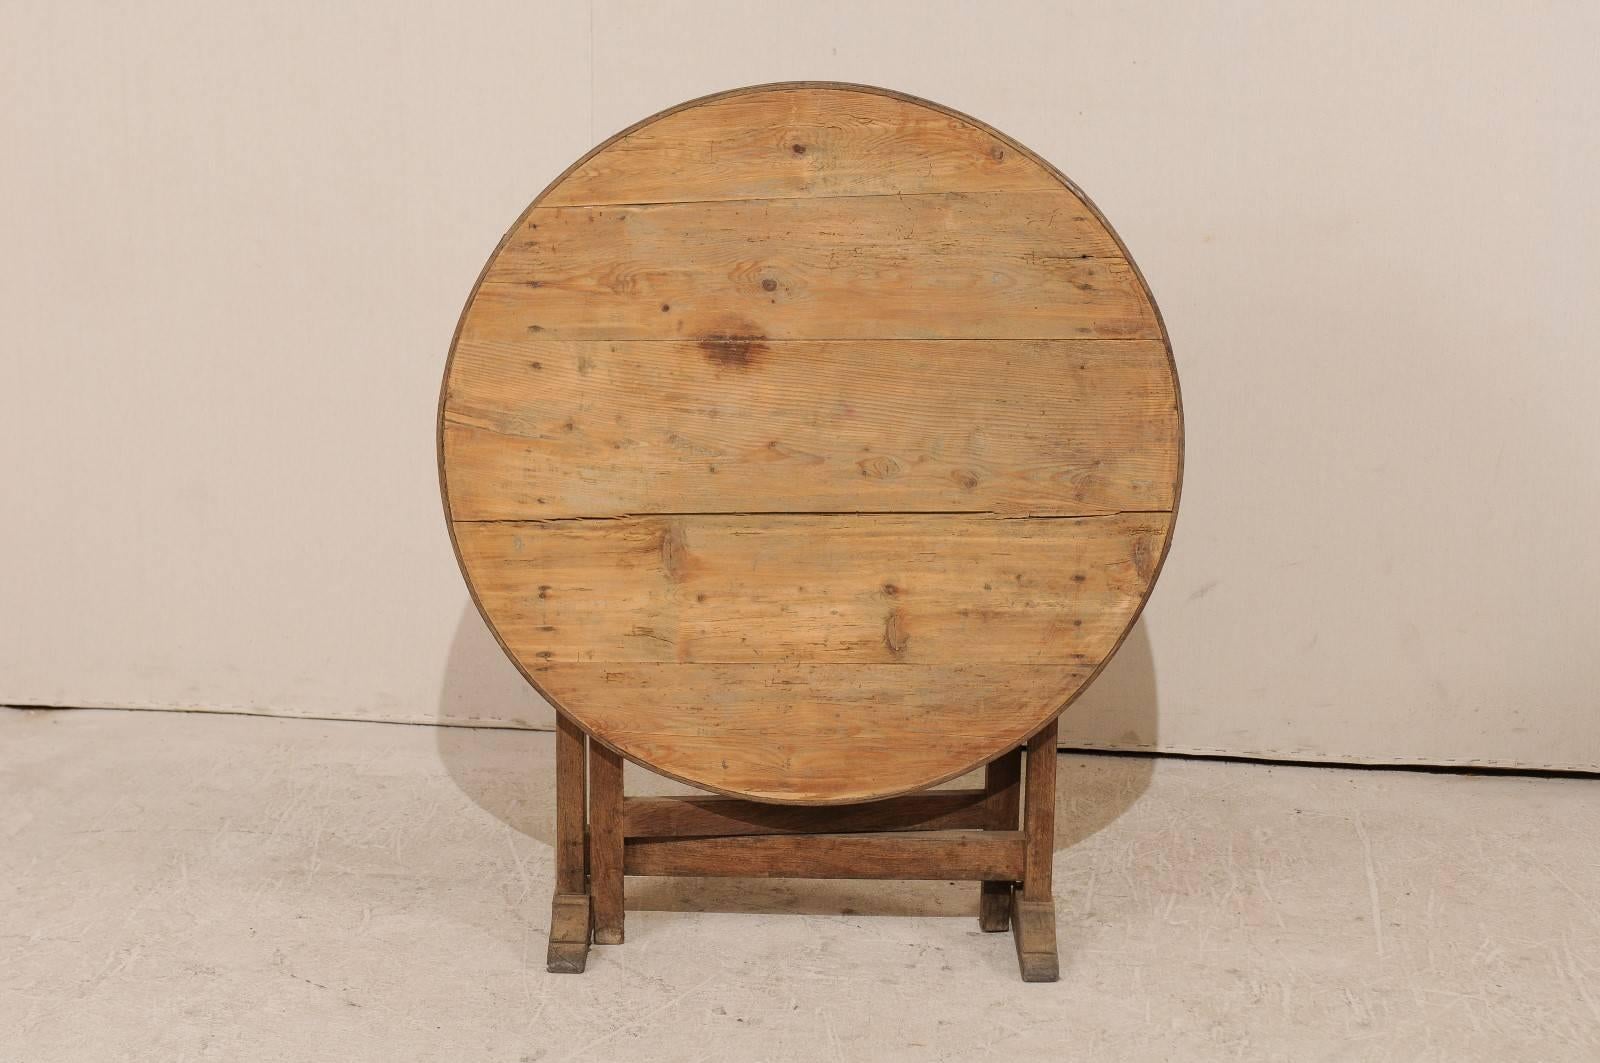 A French 19th century wine tasting table. In the typical tradition, this French wine tasting table features a tilt-top with gate legs. This rustic table has a natural finish and is nicely distressed. This French wine tasting table would work really